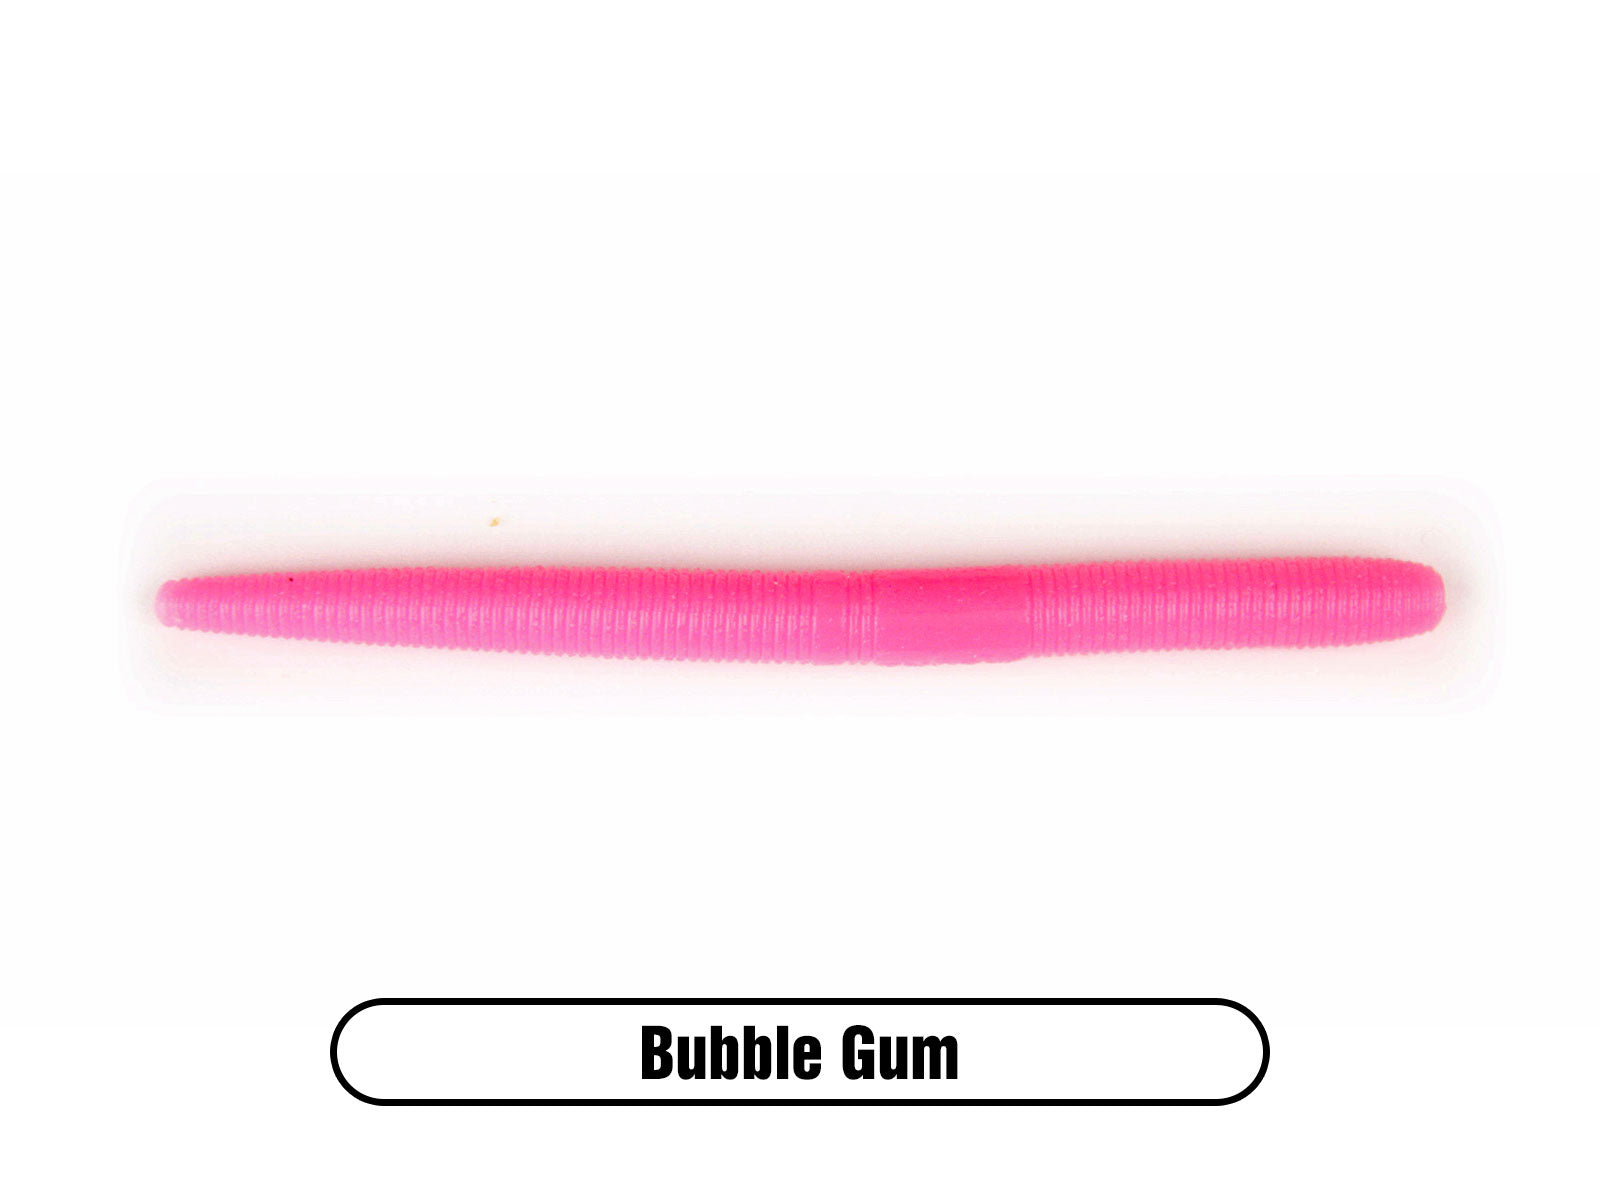 Round Bubble Floats - Bait Fishing Terminal Tackle